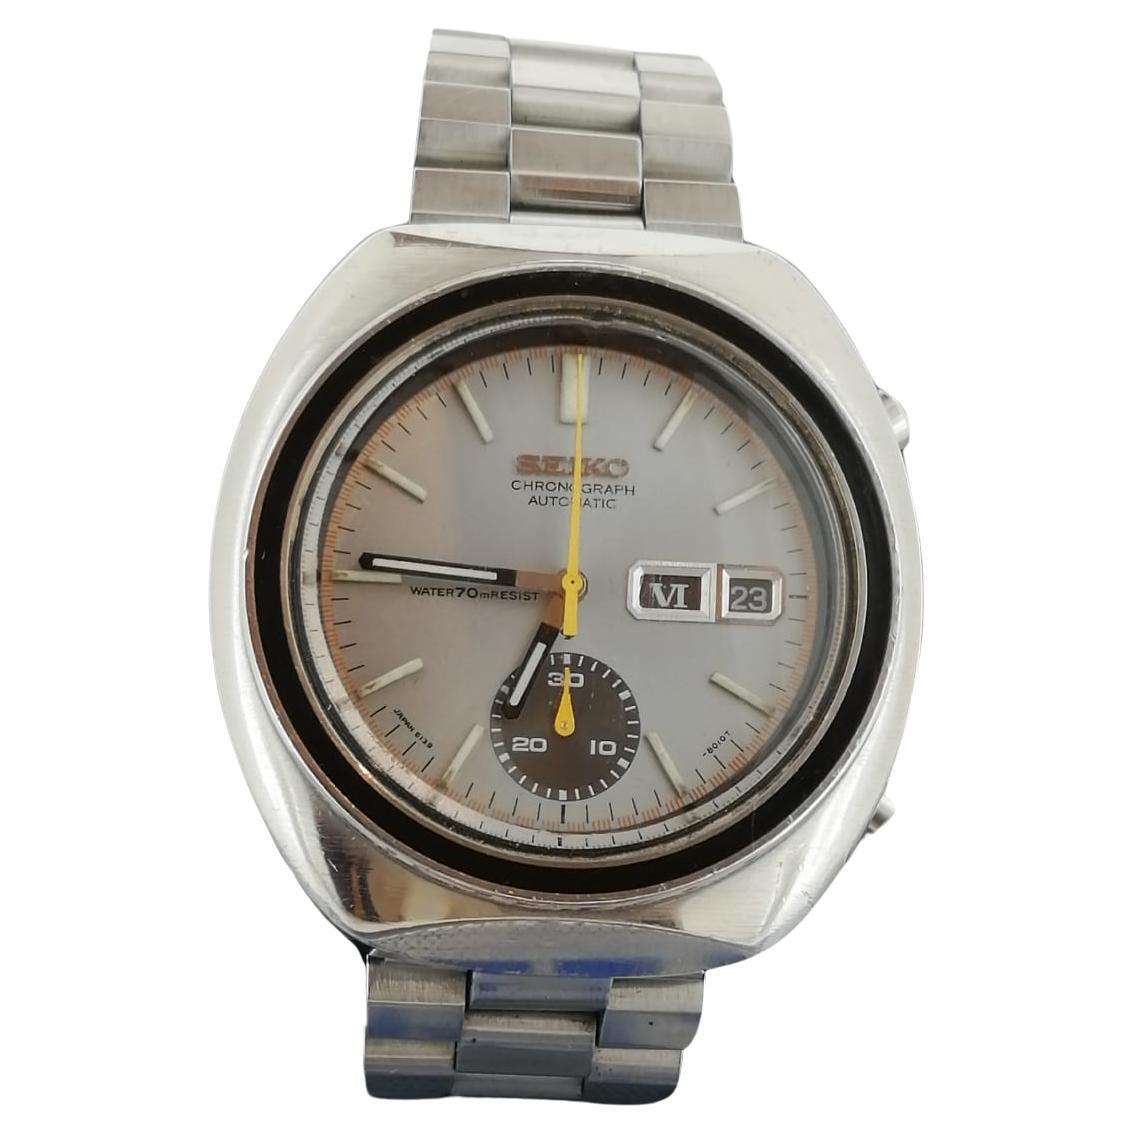 Seiko Chronograph ref 6139-8001 Japan Automatic 17 jewels c1969 Mens' Watch For Sale